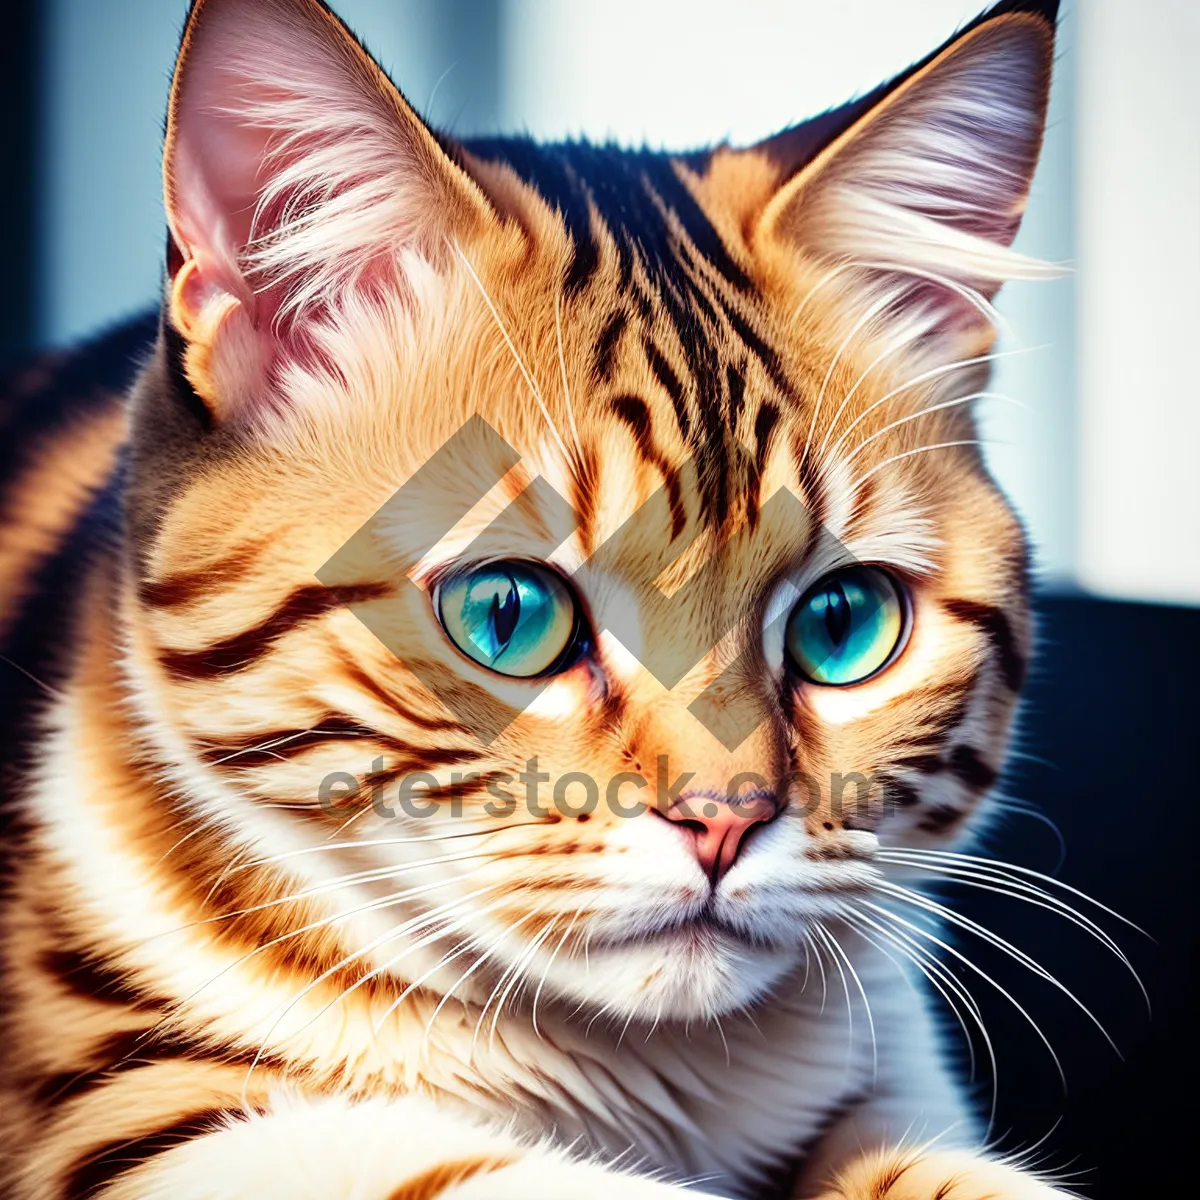 Picture of Fluffy Tabby Cat Portrait: Cute and Curious Kitty